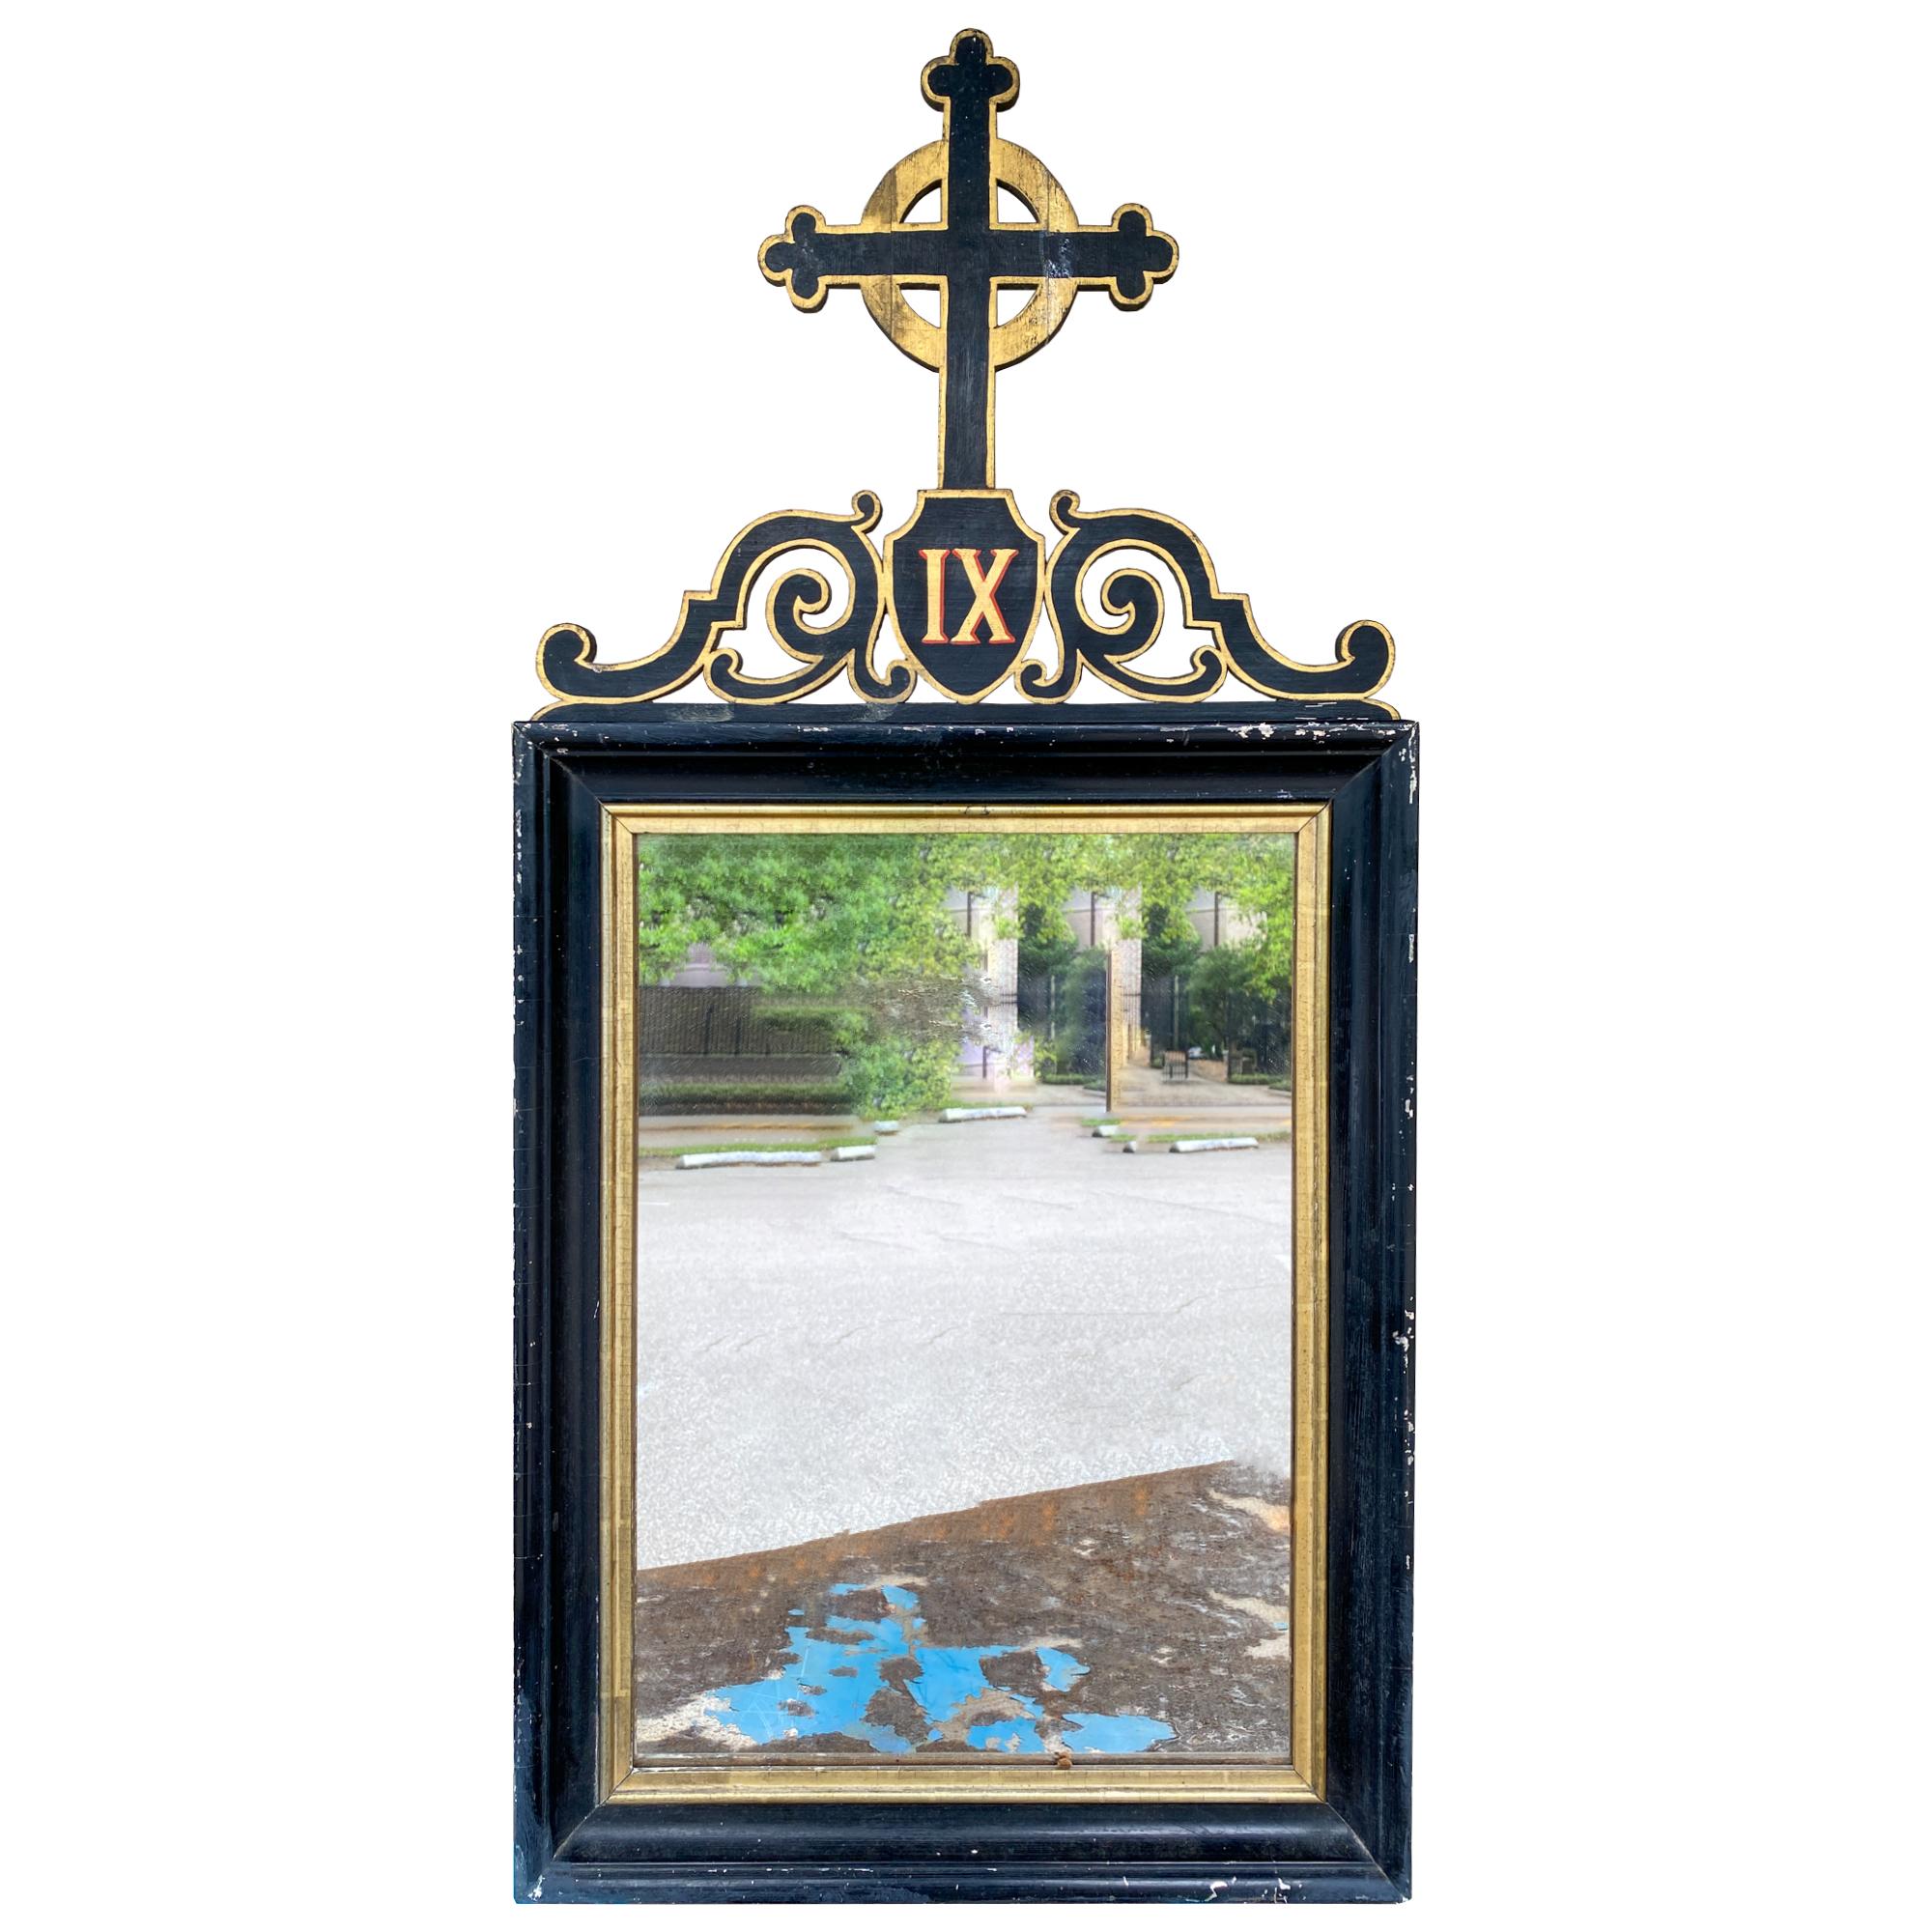 A very special pairing of antique French ebonized and giltwood stations of the cross framed mirrors, which likely once held artwork reflecting the stations, but have since been modified as mirrors. Each piece features a decorative open carving of a